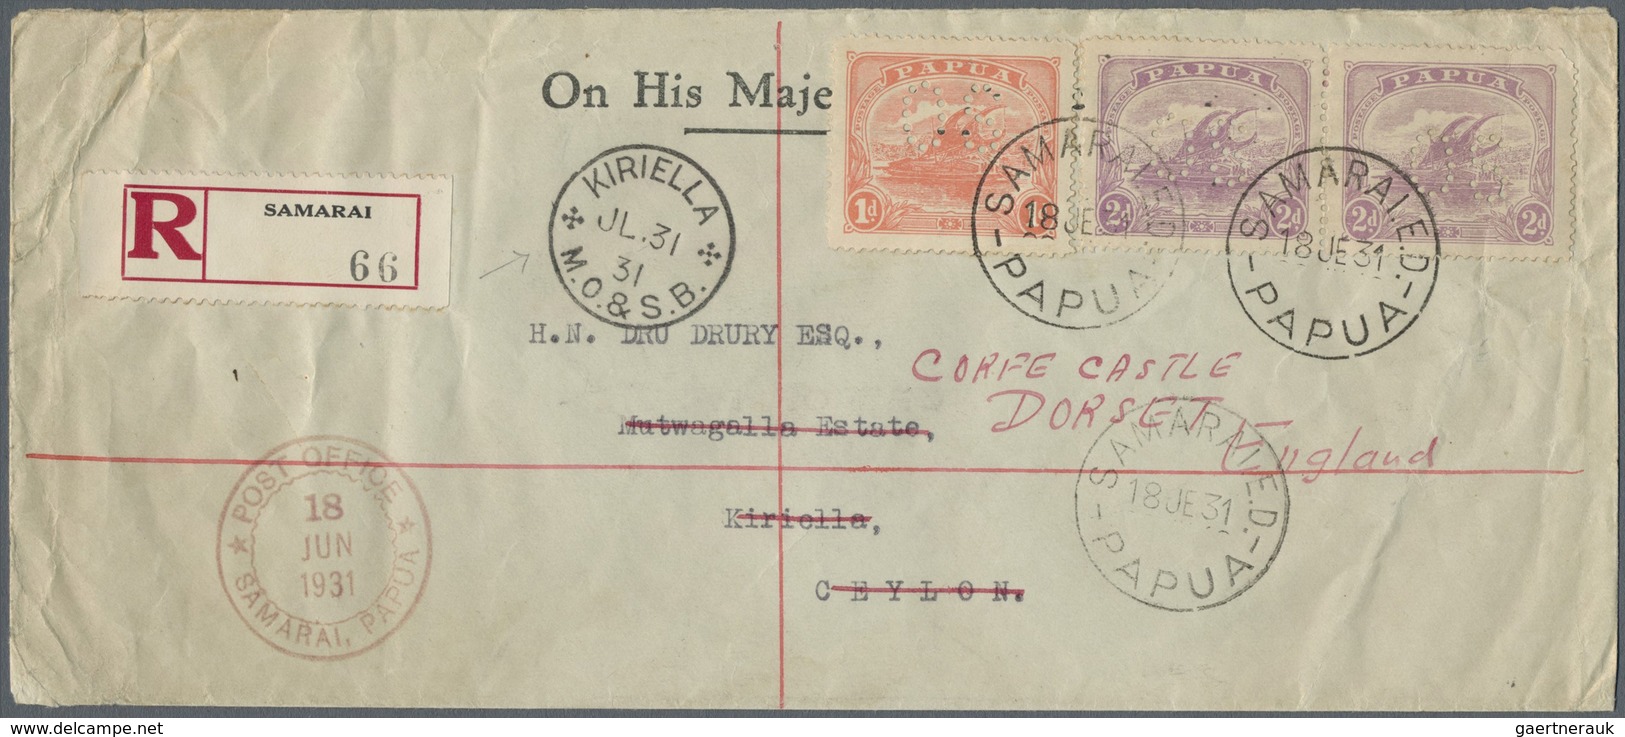 Br Papua: 1931. Registered Envelope (slightly Creased) Headed 'On His Majesty's Service' Addressed To C - Papouasie-Nouvelle-Guinée